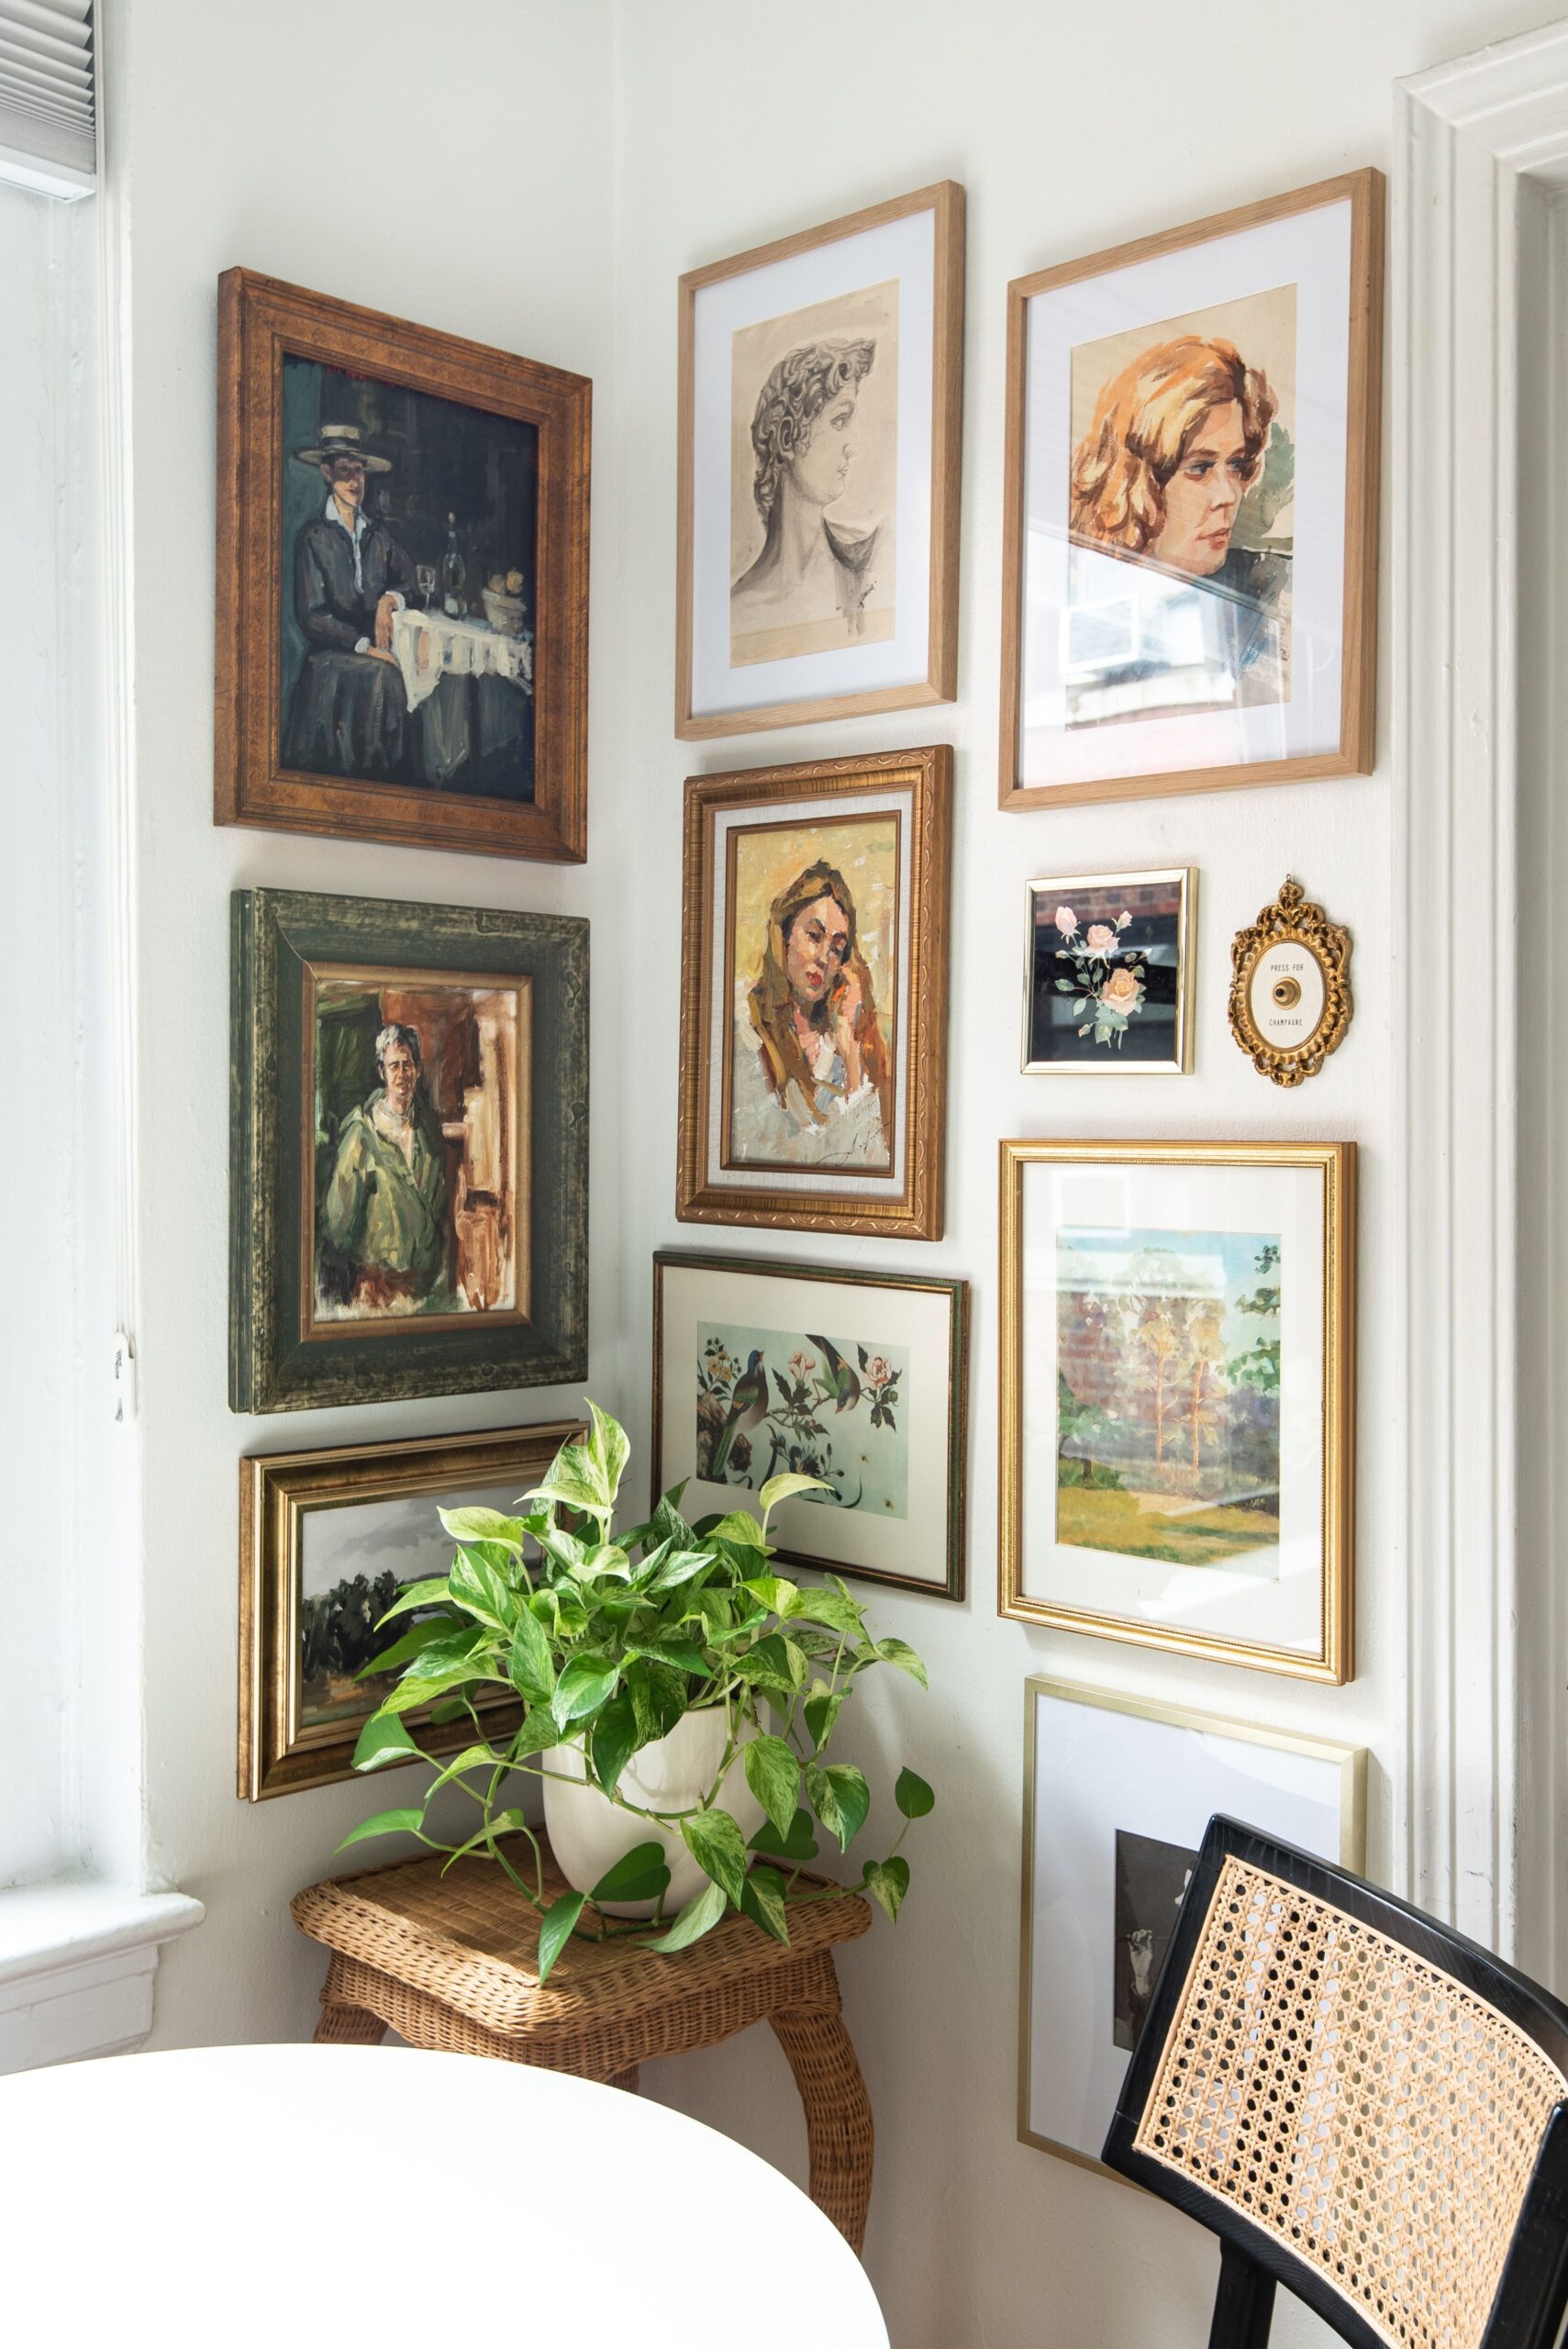 Transform Your Space With Chic Corner Wall Decor Ideas!